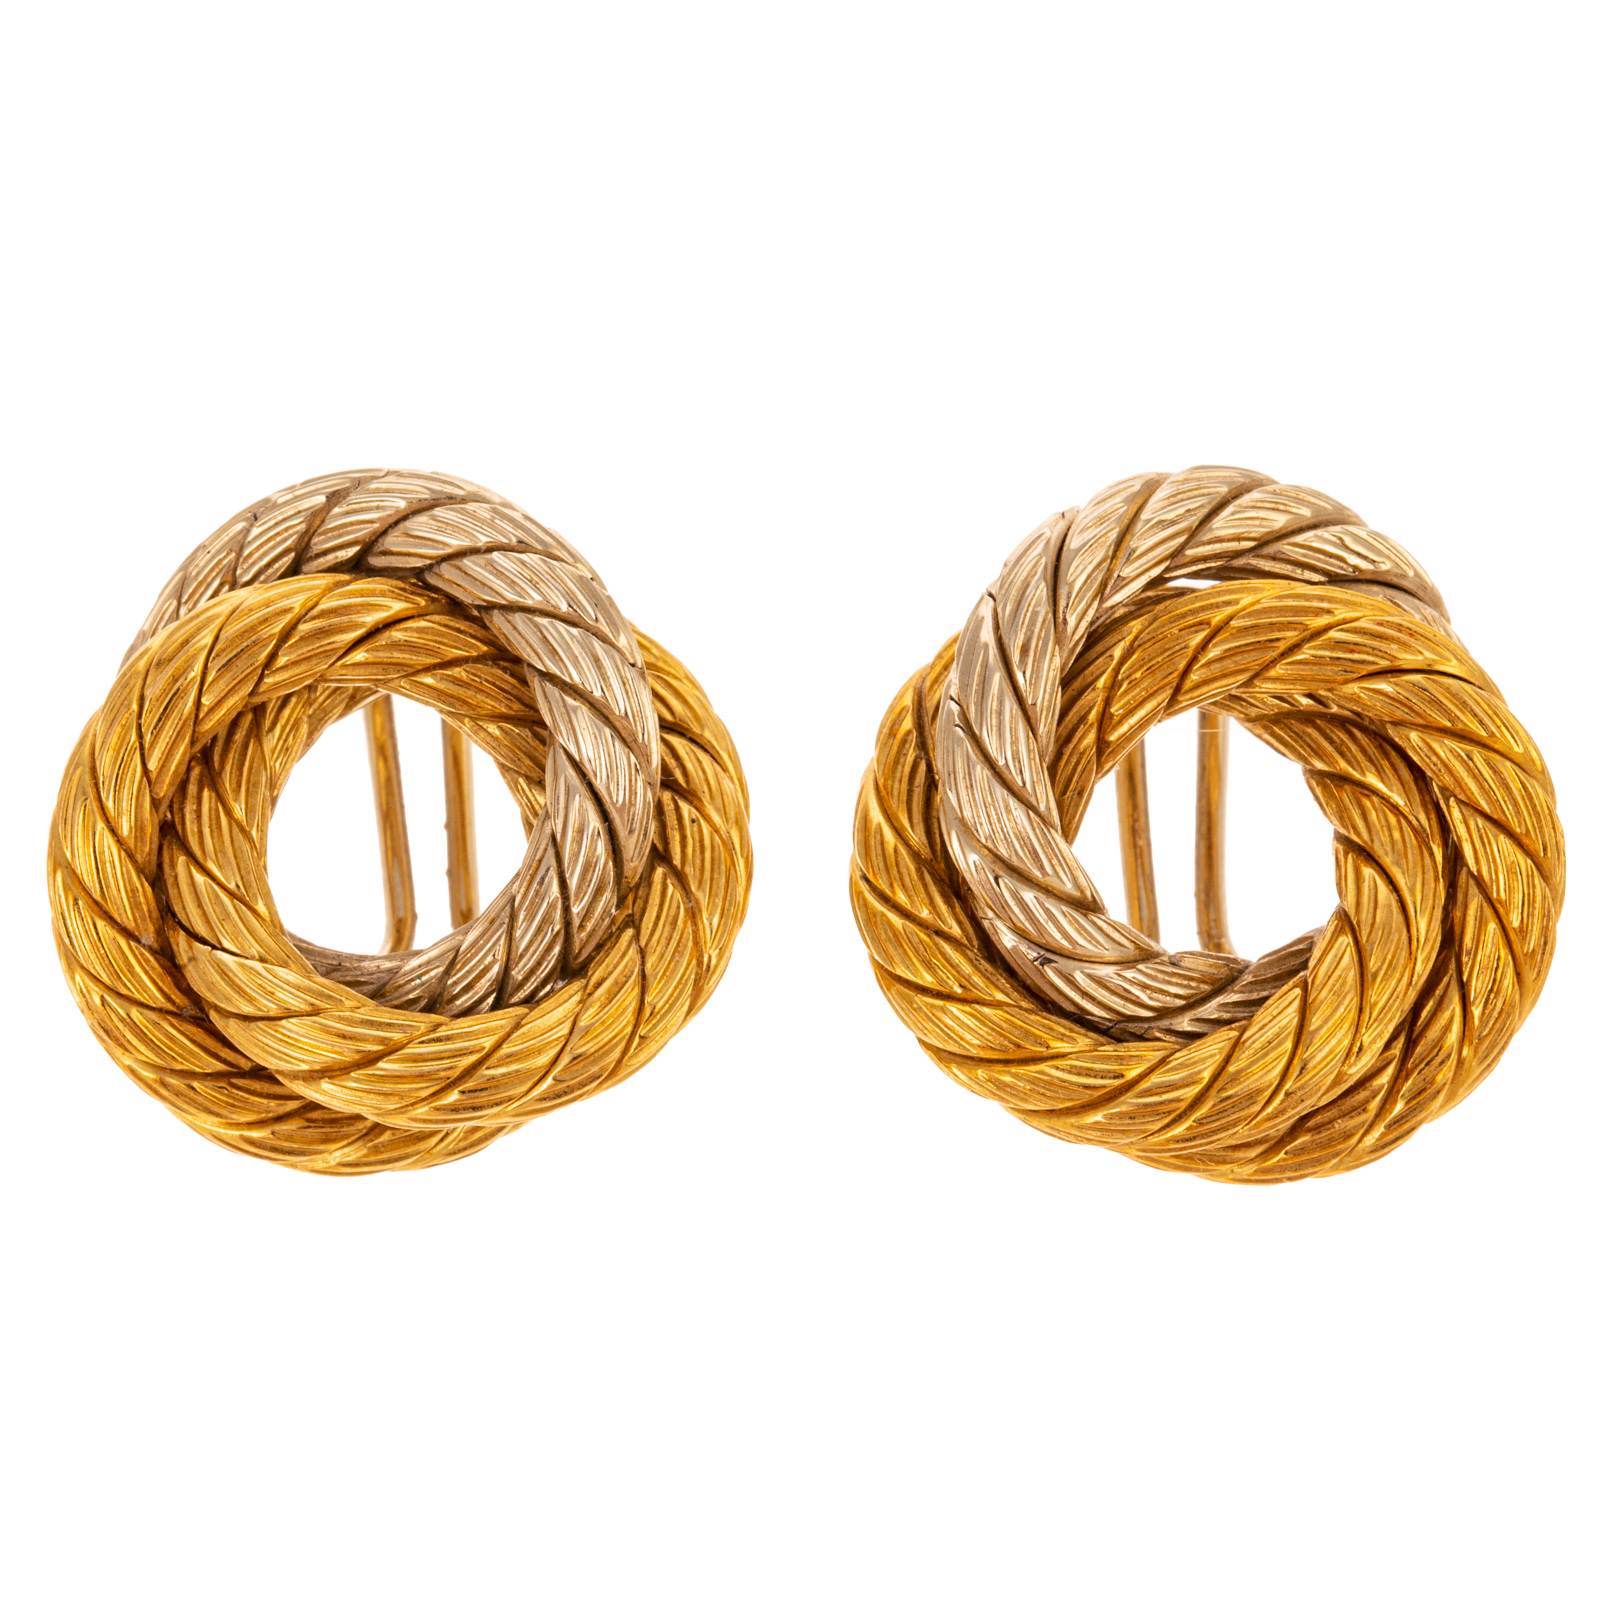 A PAIR OF 18K TWO TONE KNOT CLIP 33854f